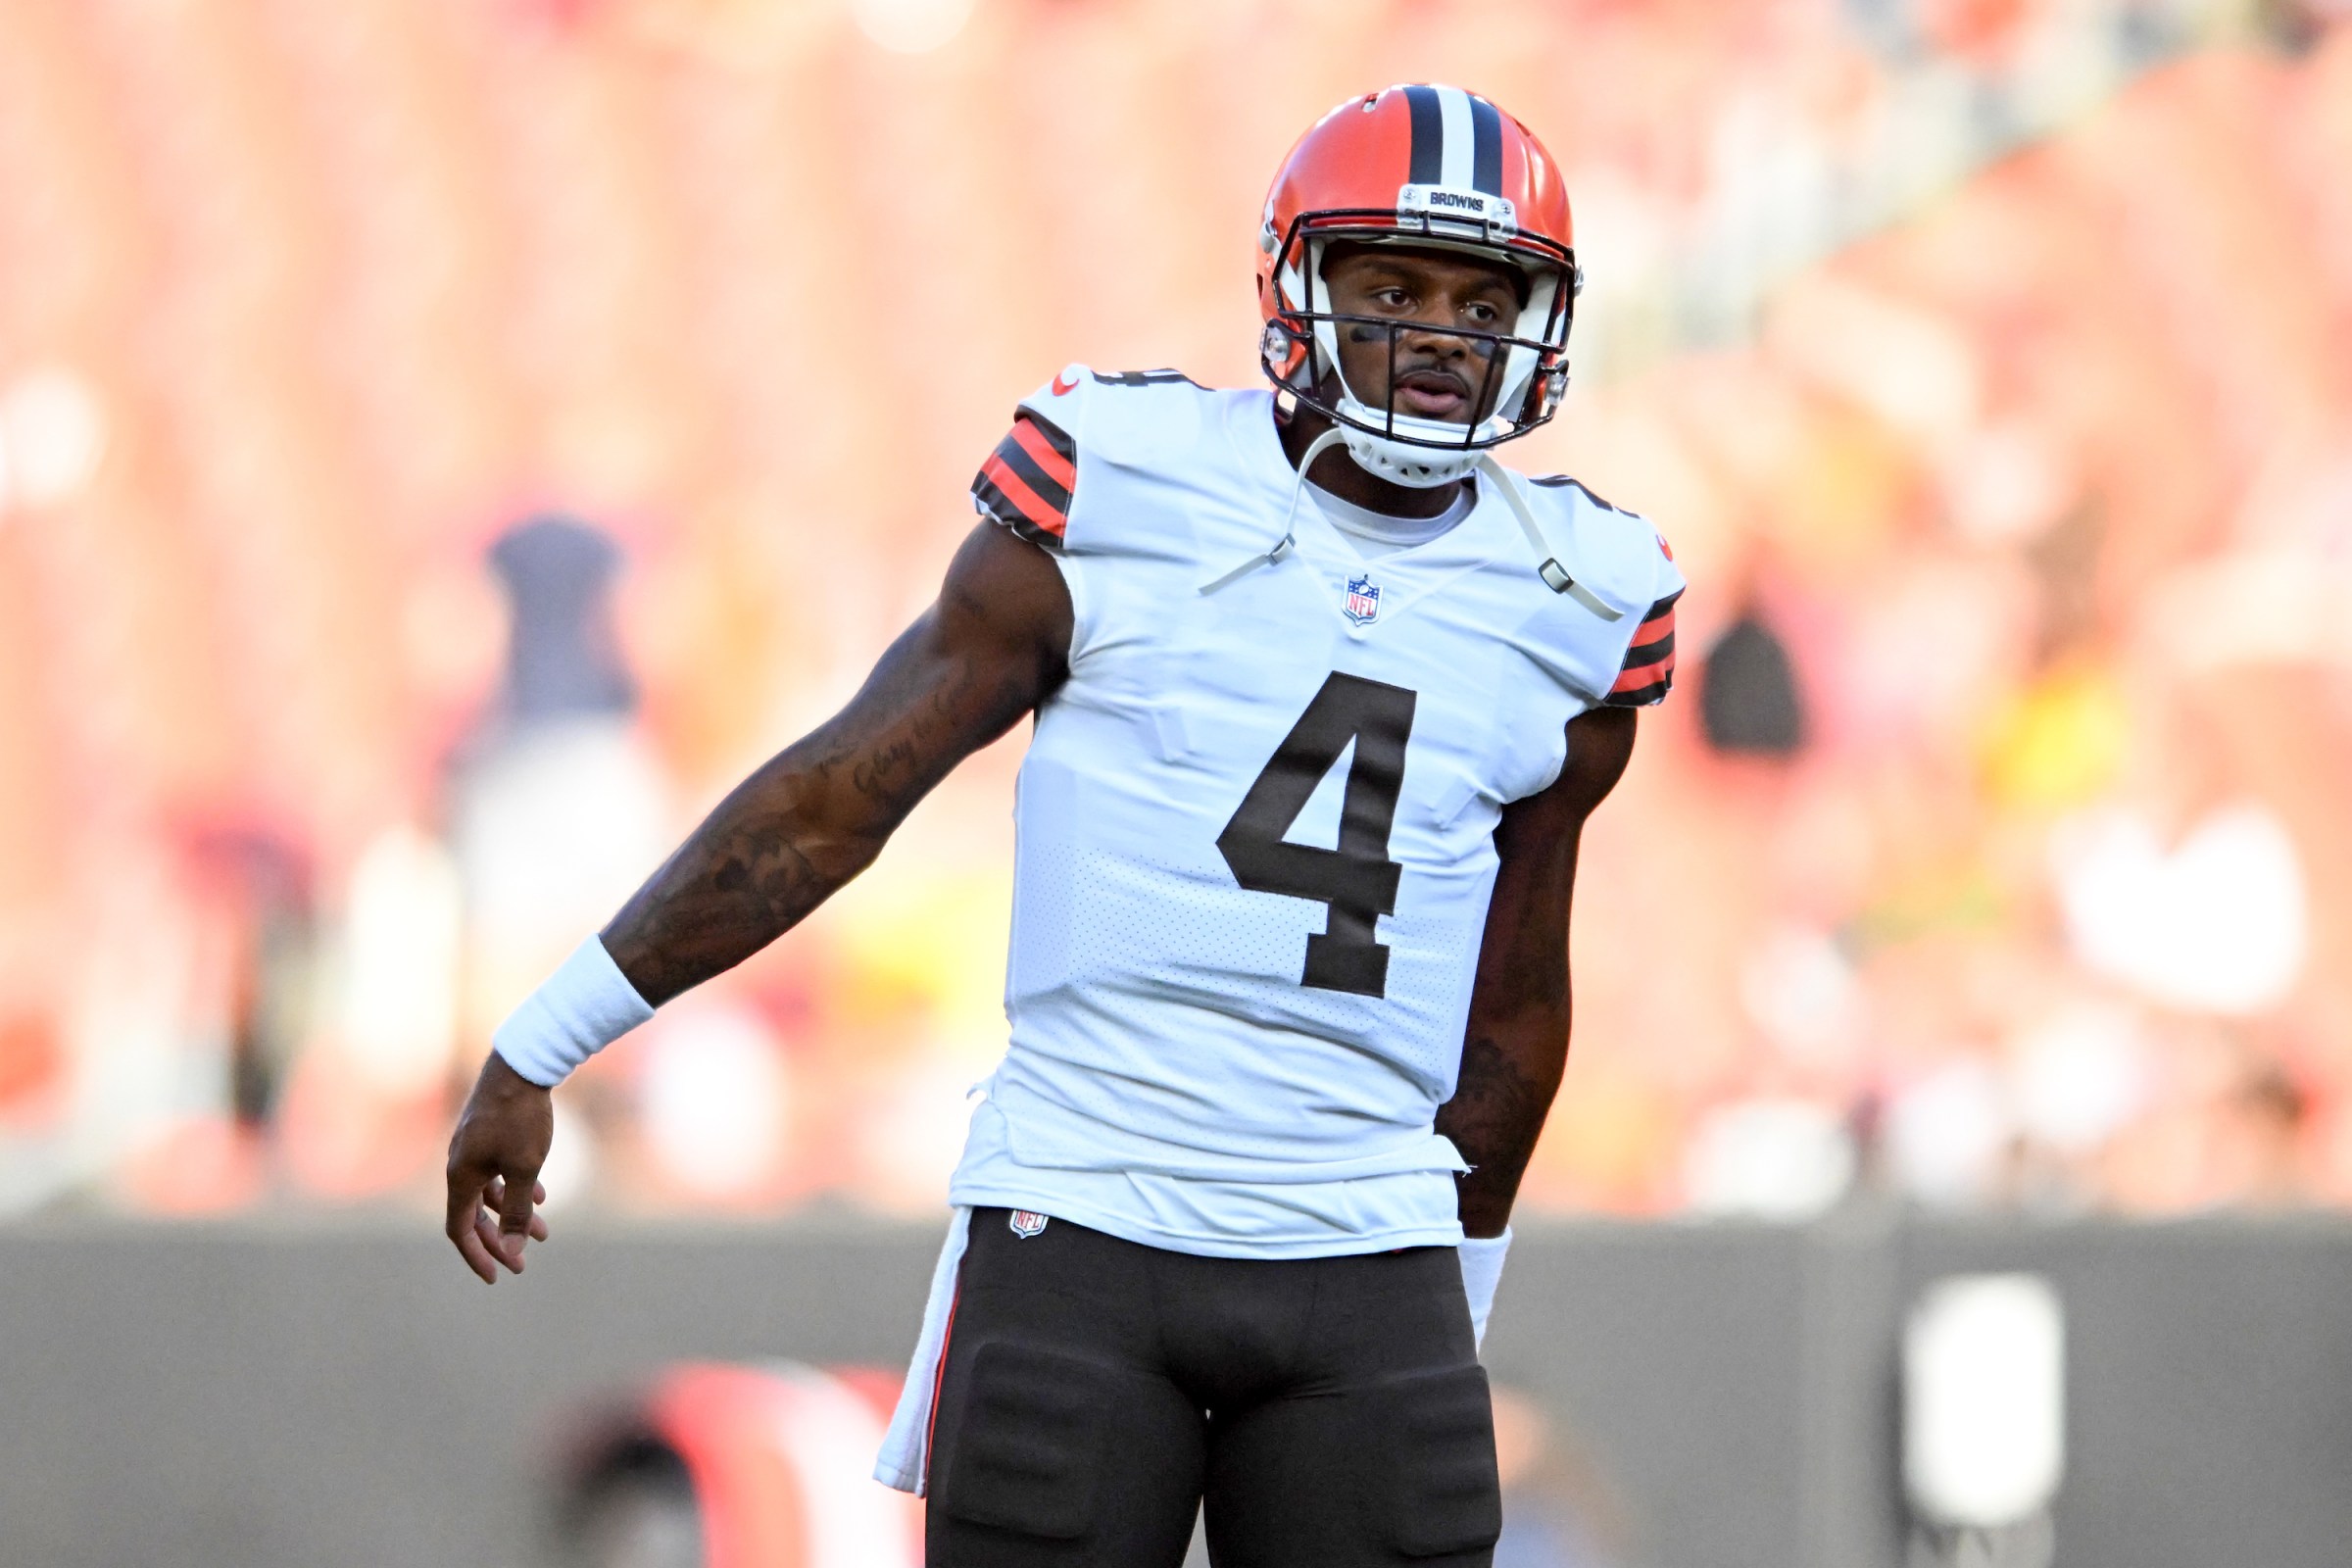 Deshaun Watson #4 of the Cleveland Browns warms up prior to a preseason game against the Chicago Bears at FirstEnergy Stadium on August 27, 2022 in Cleveland, Ohio.